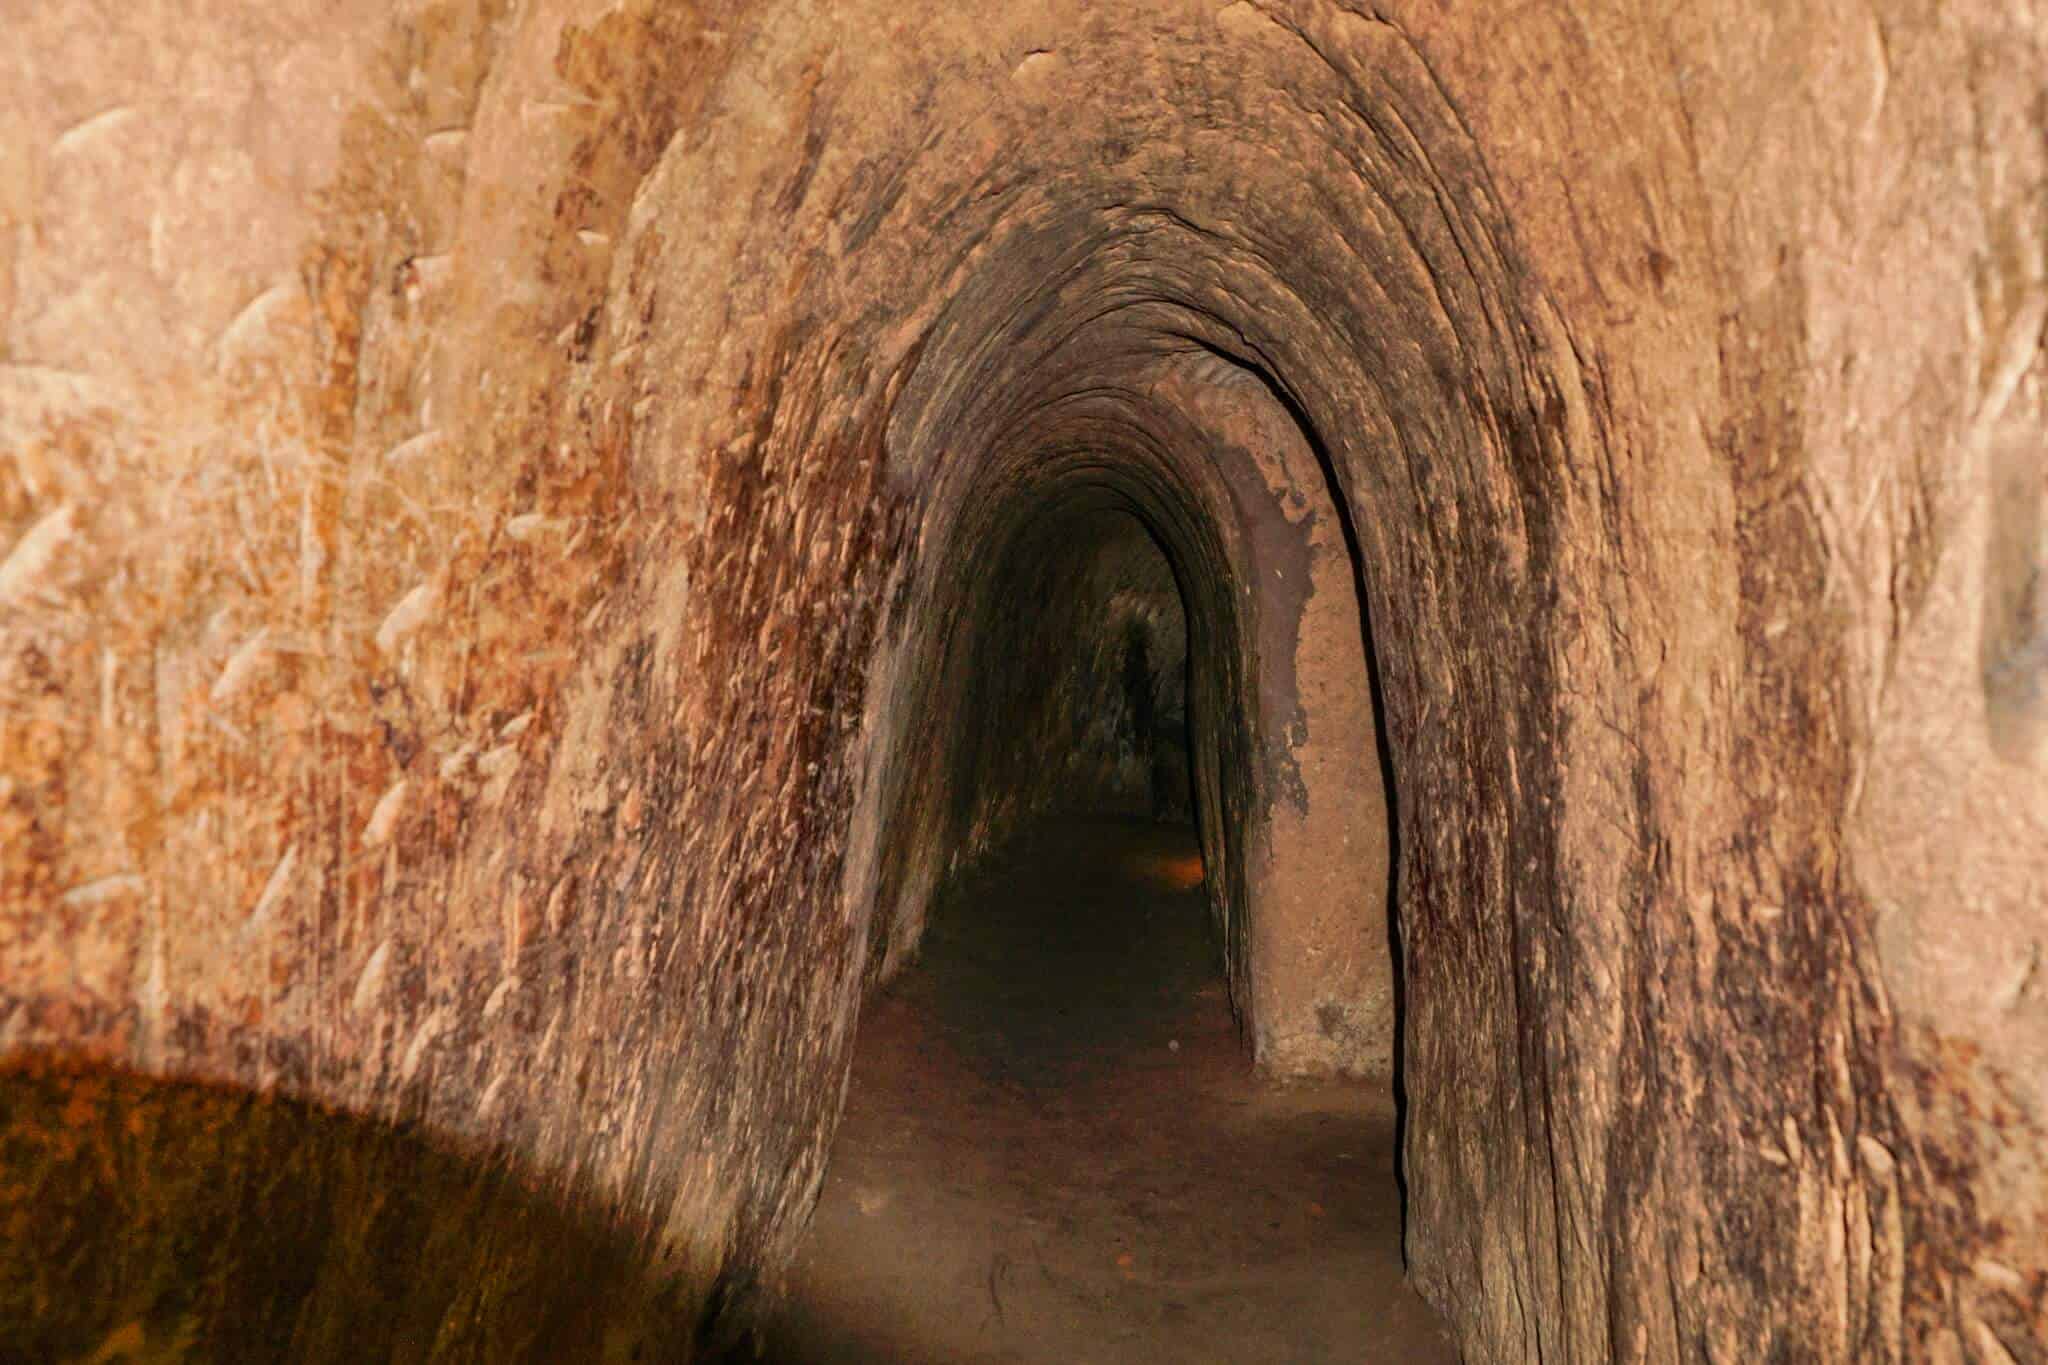 Tips for Visiting Cu Chi Tunnels Half-Day Tour Guide